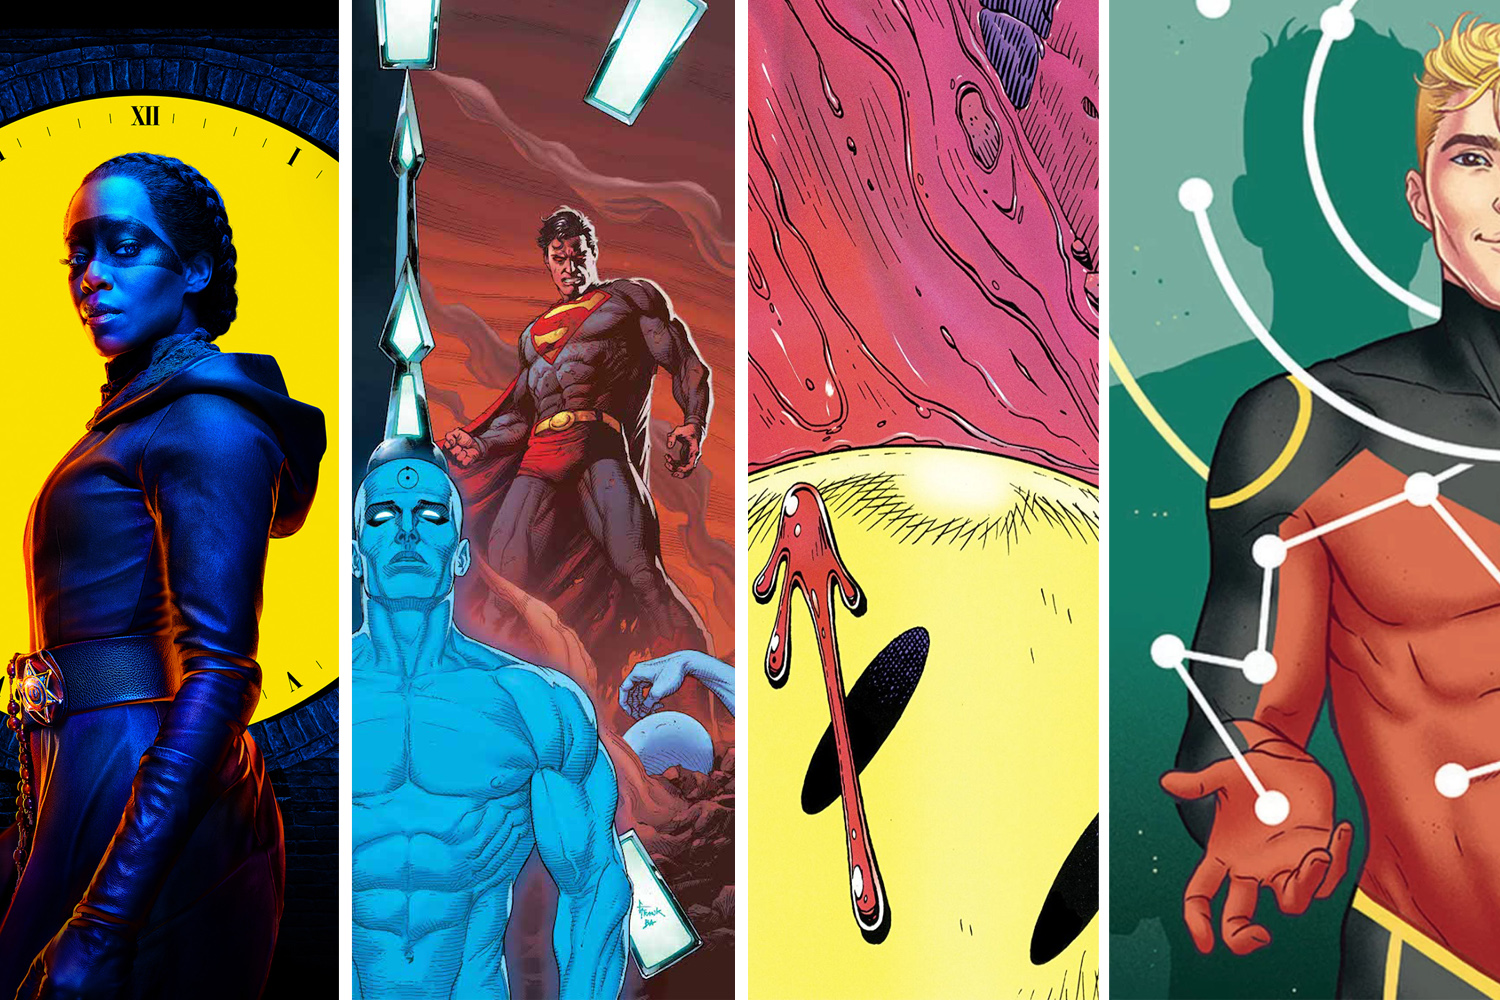 Watching the 'Watchmen': A critical conversation on 3 canons